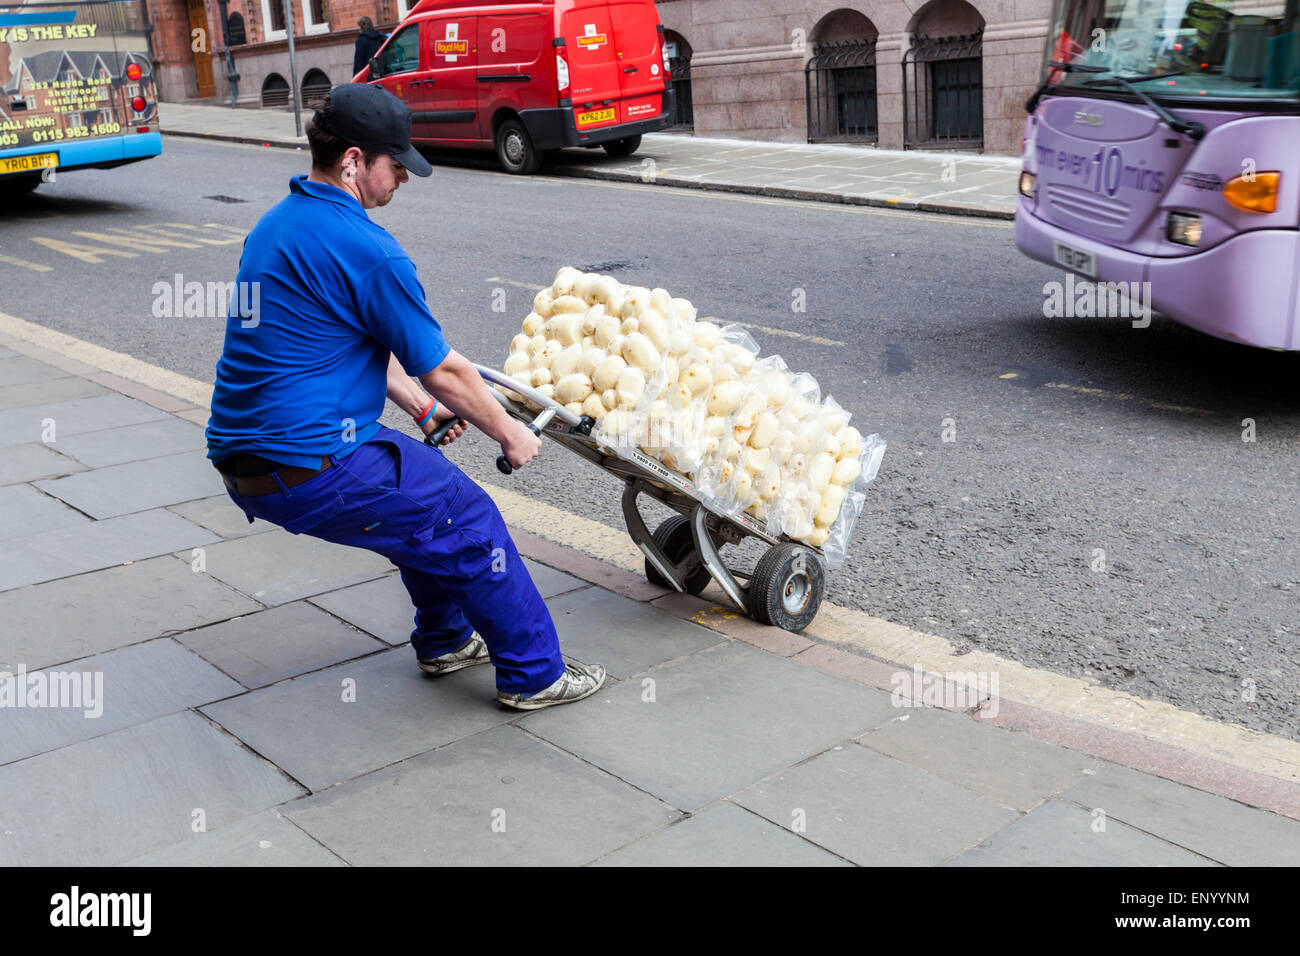 Delivery man delivering potatoes to a restaurant, Nottingham, England, UK Stock Photo